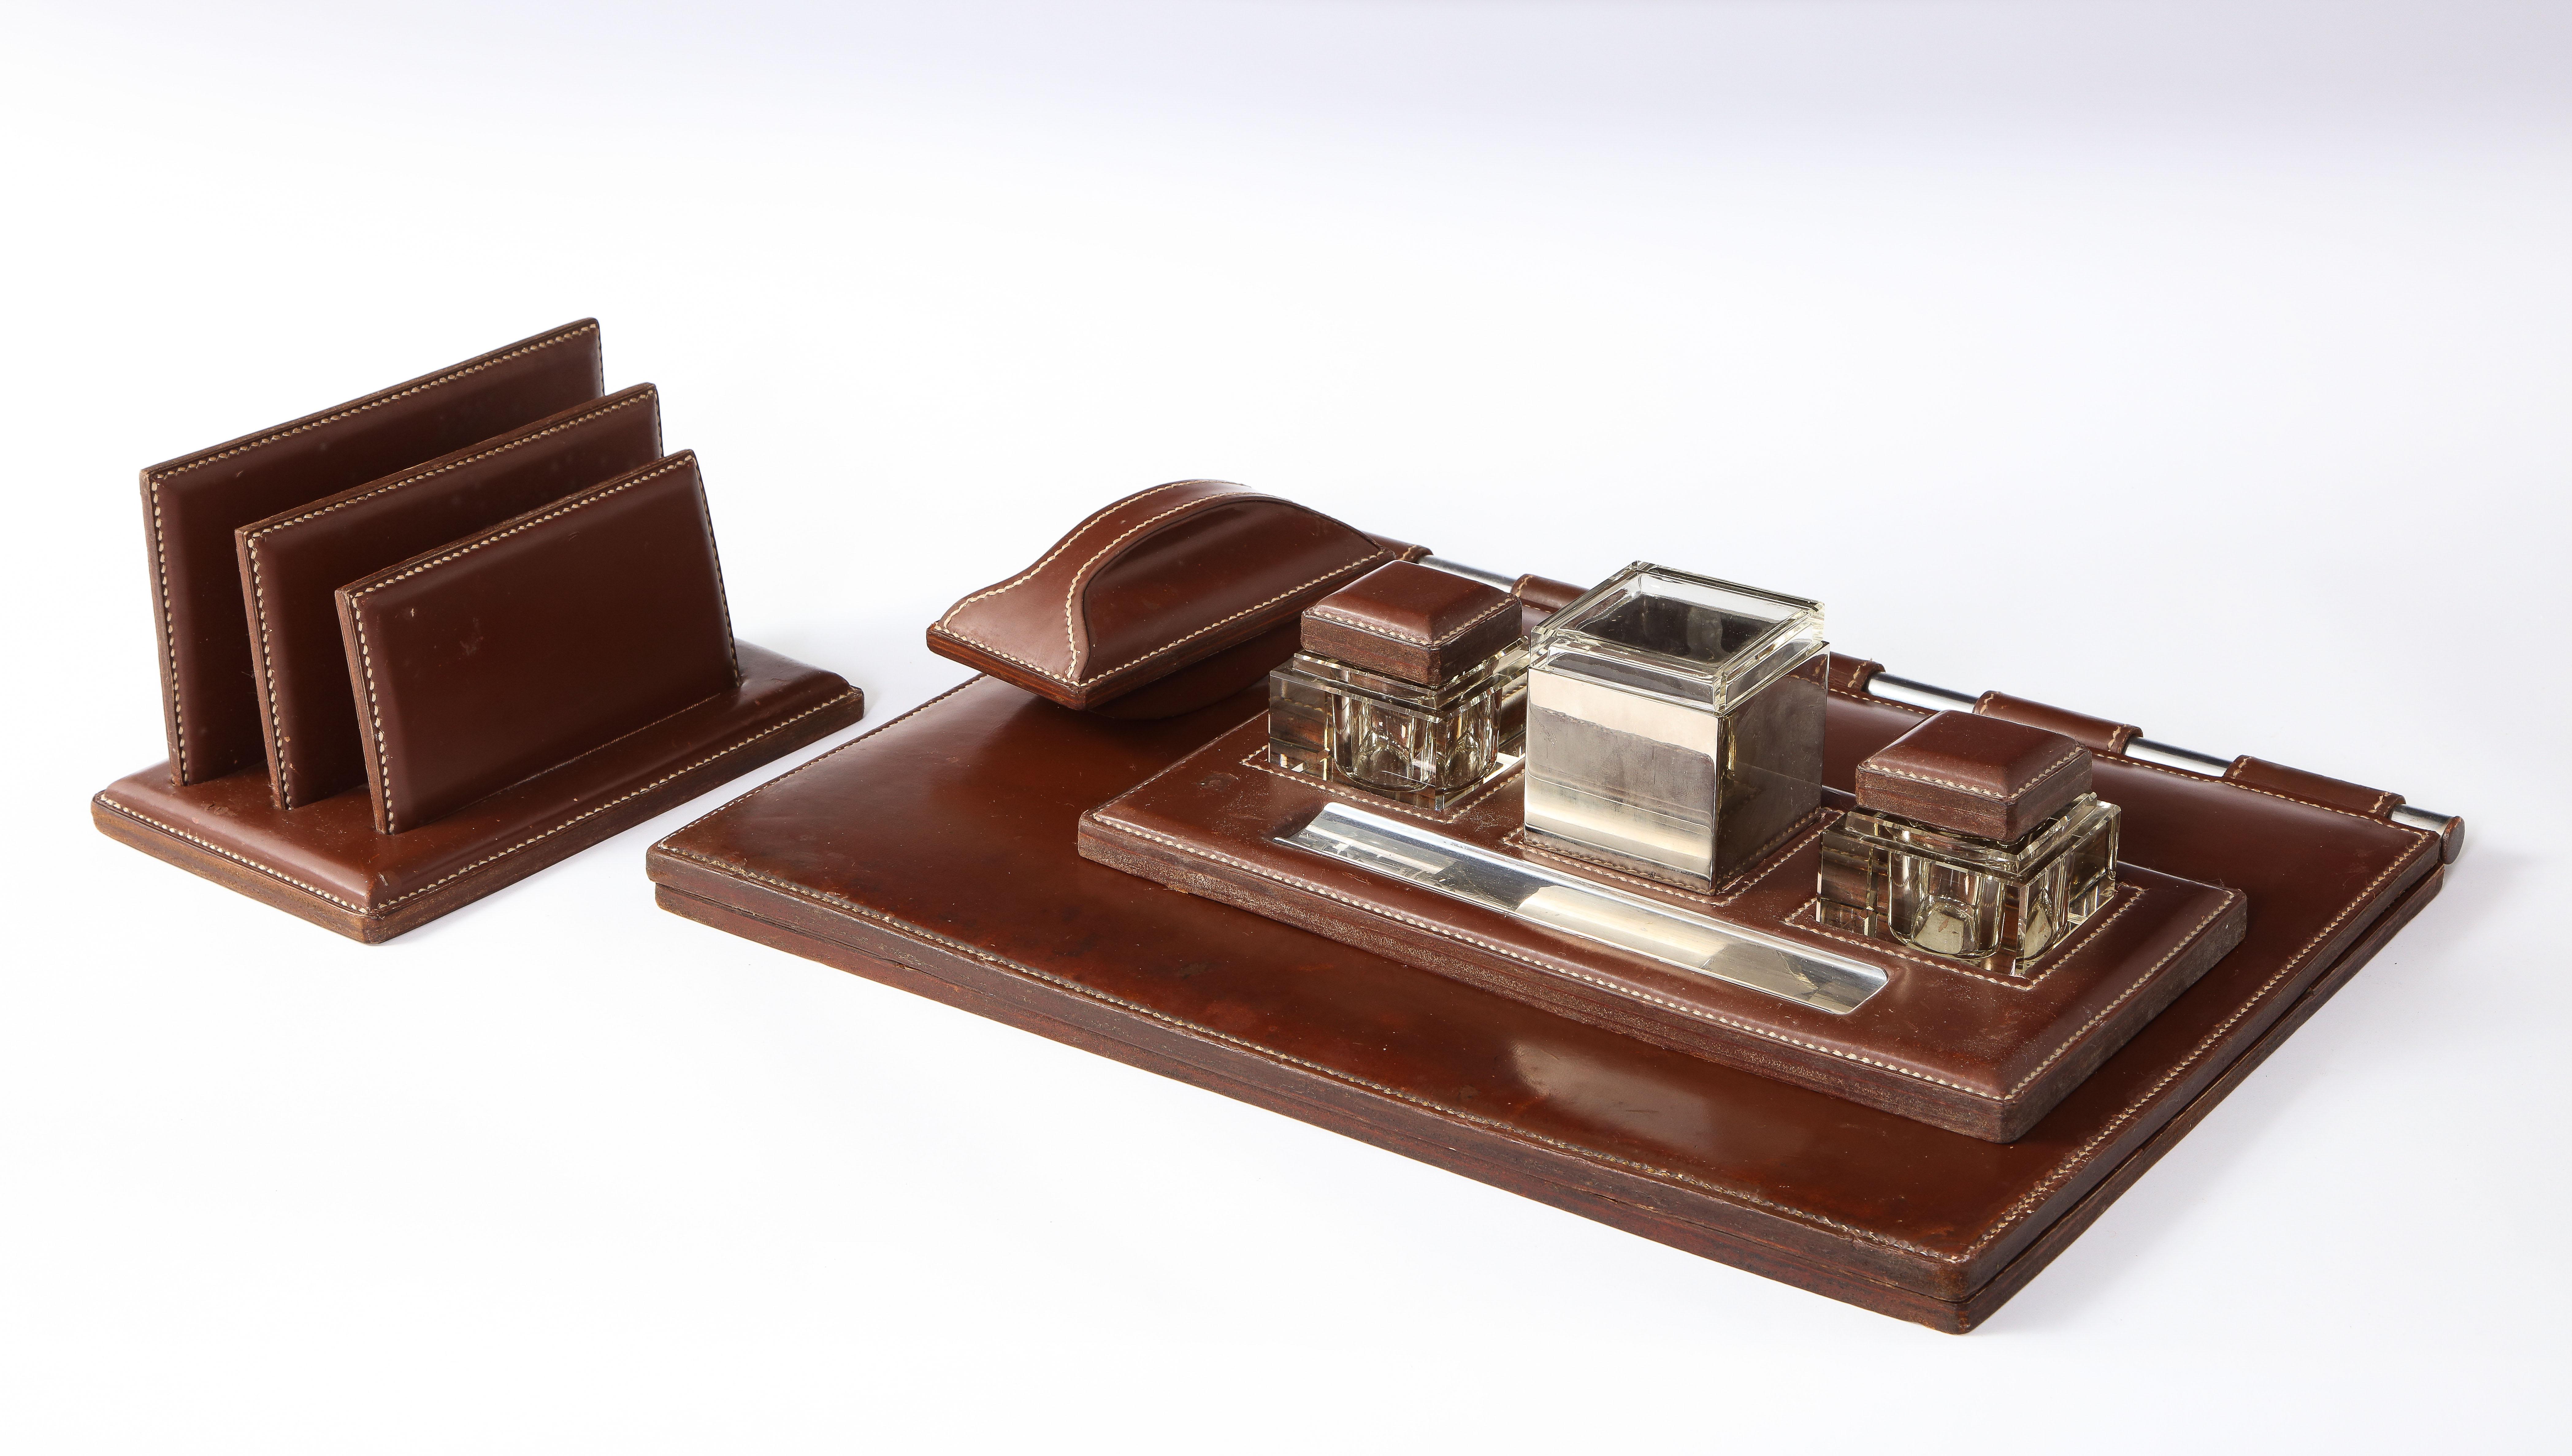 A desk set by Adnet, comprises a complete inkwell, an ink blotter, a letters holder and a desk mat that opens up and can be fitted with writing paper. In excellent vintage condition.